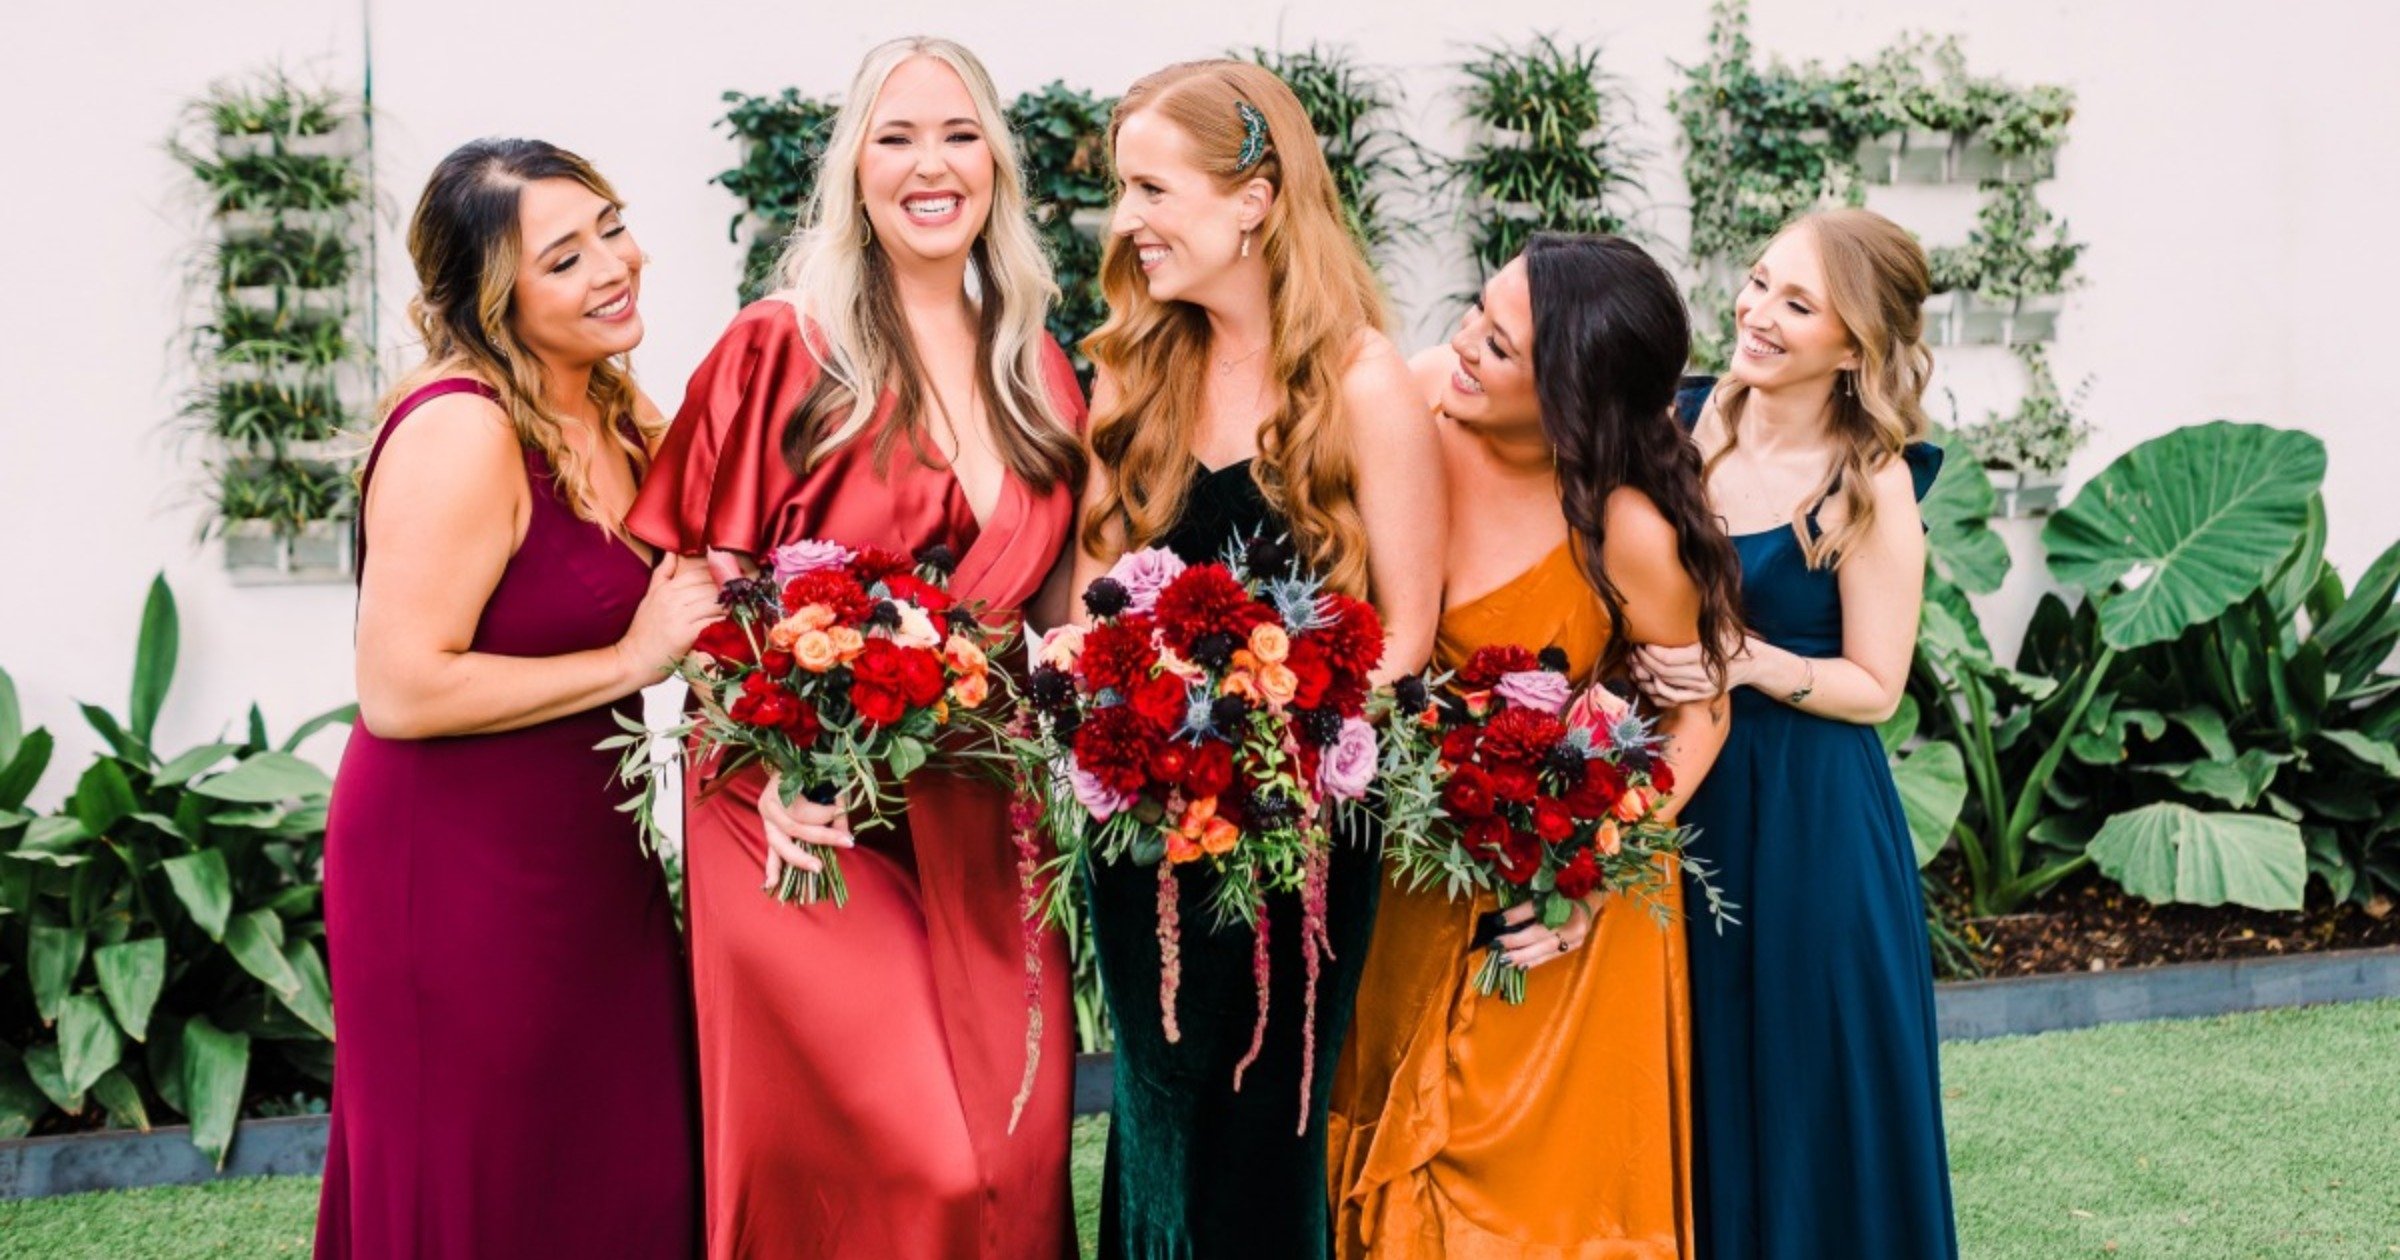 A stunning jewel toned wedding with an emerald bridal gown